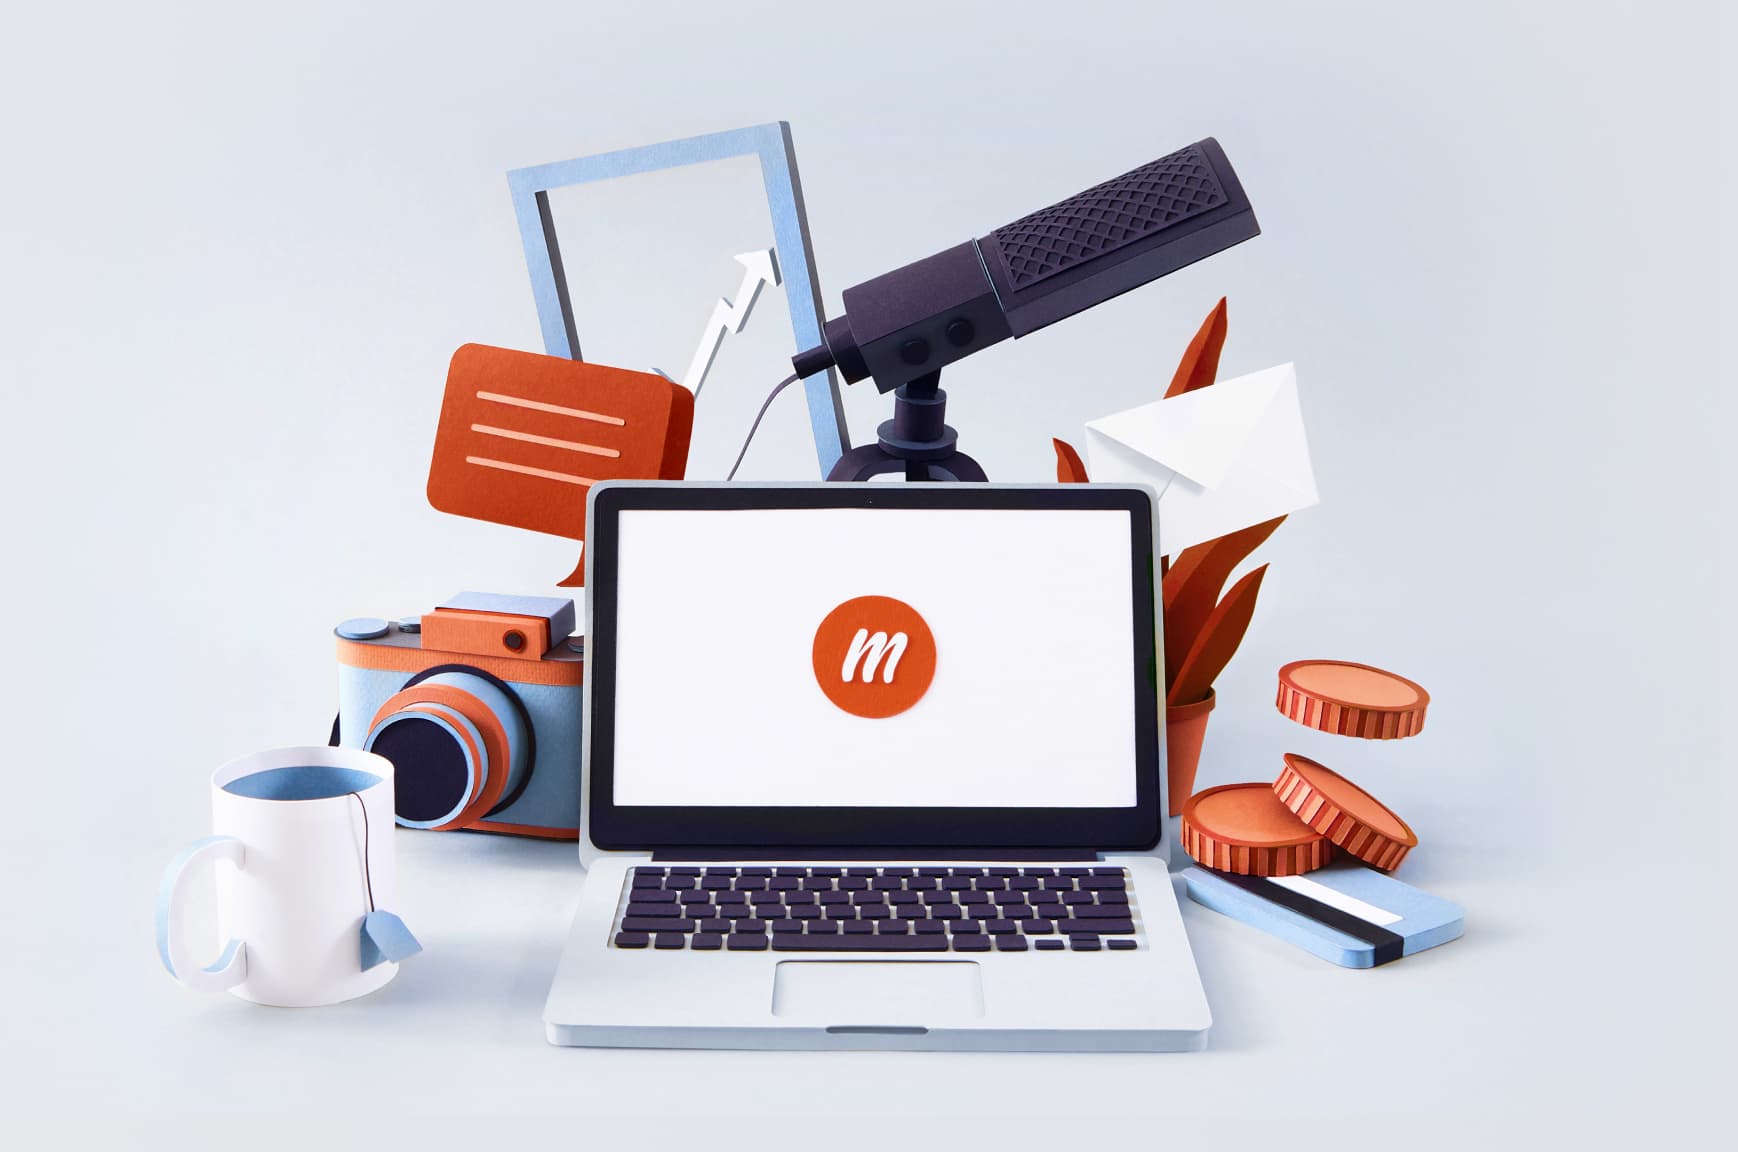 Paper illustrations of a laptop with a memberful logo surrounded by a teacup, camera, microphone, and more.